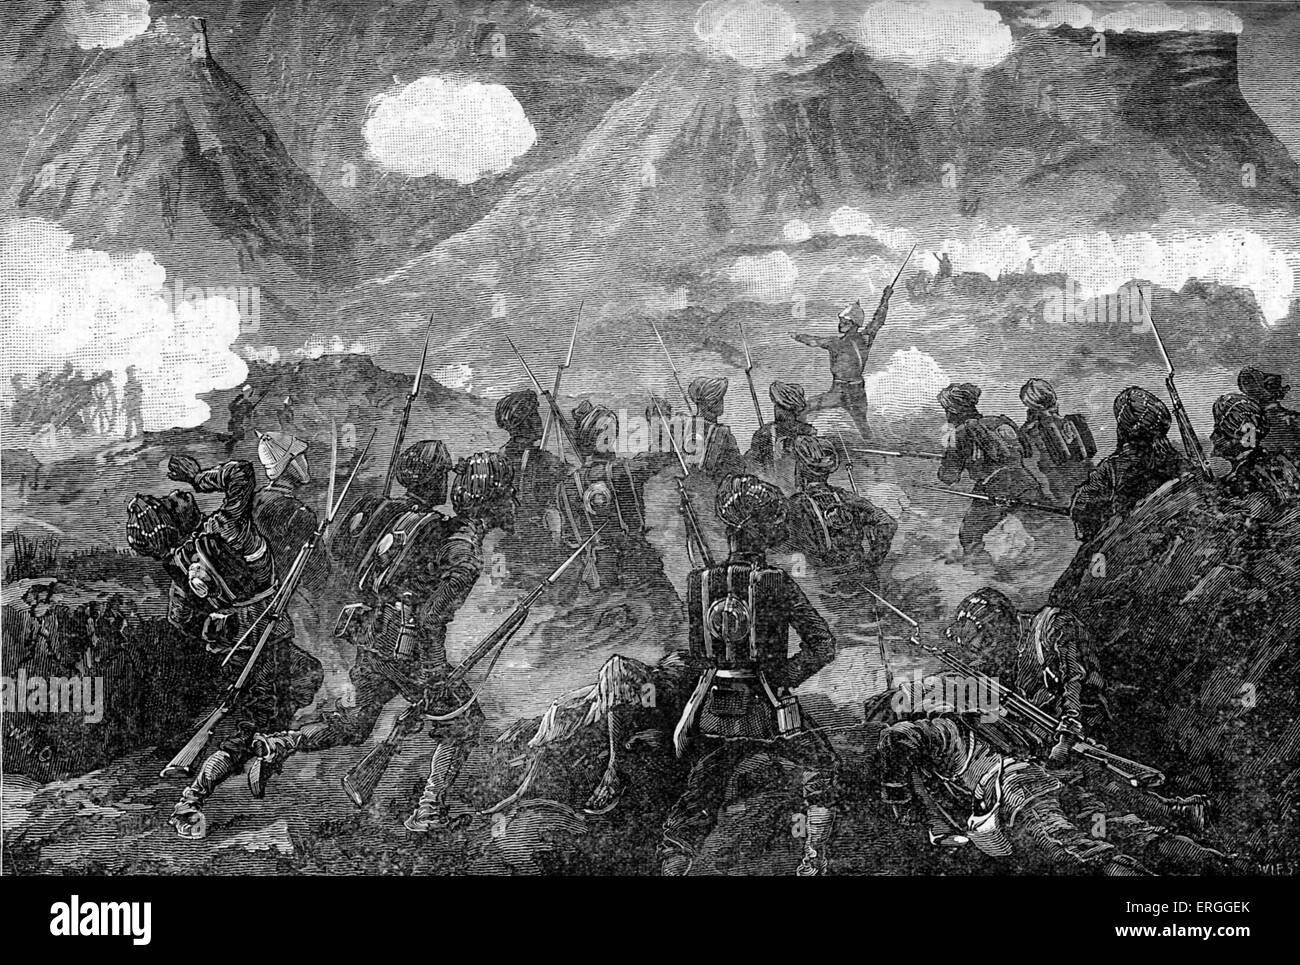 Second Anglo-Afghan War: Attack on Ali Masjid by British Peshawar Valley Field Force under General Sir Samuel Browne, 1878. Stock Photo